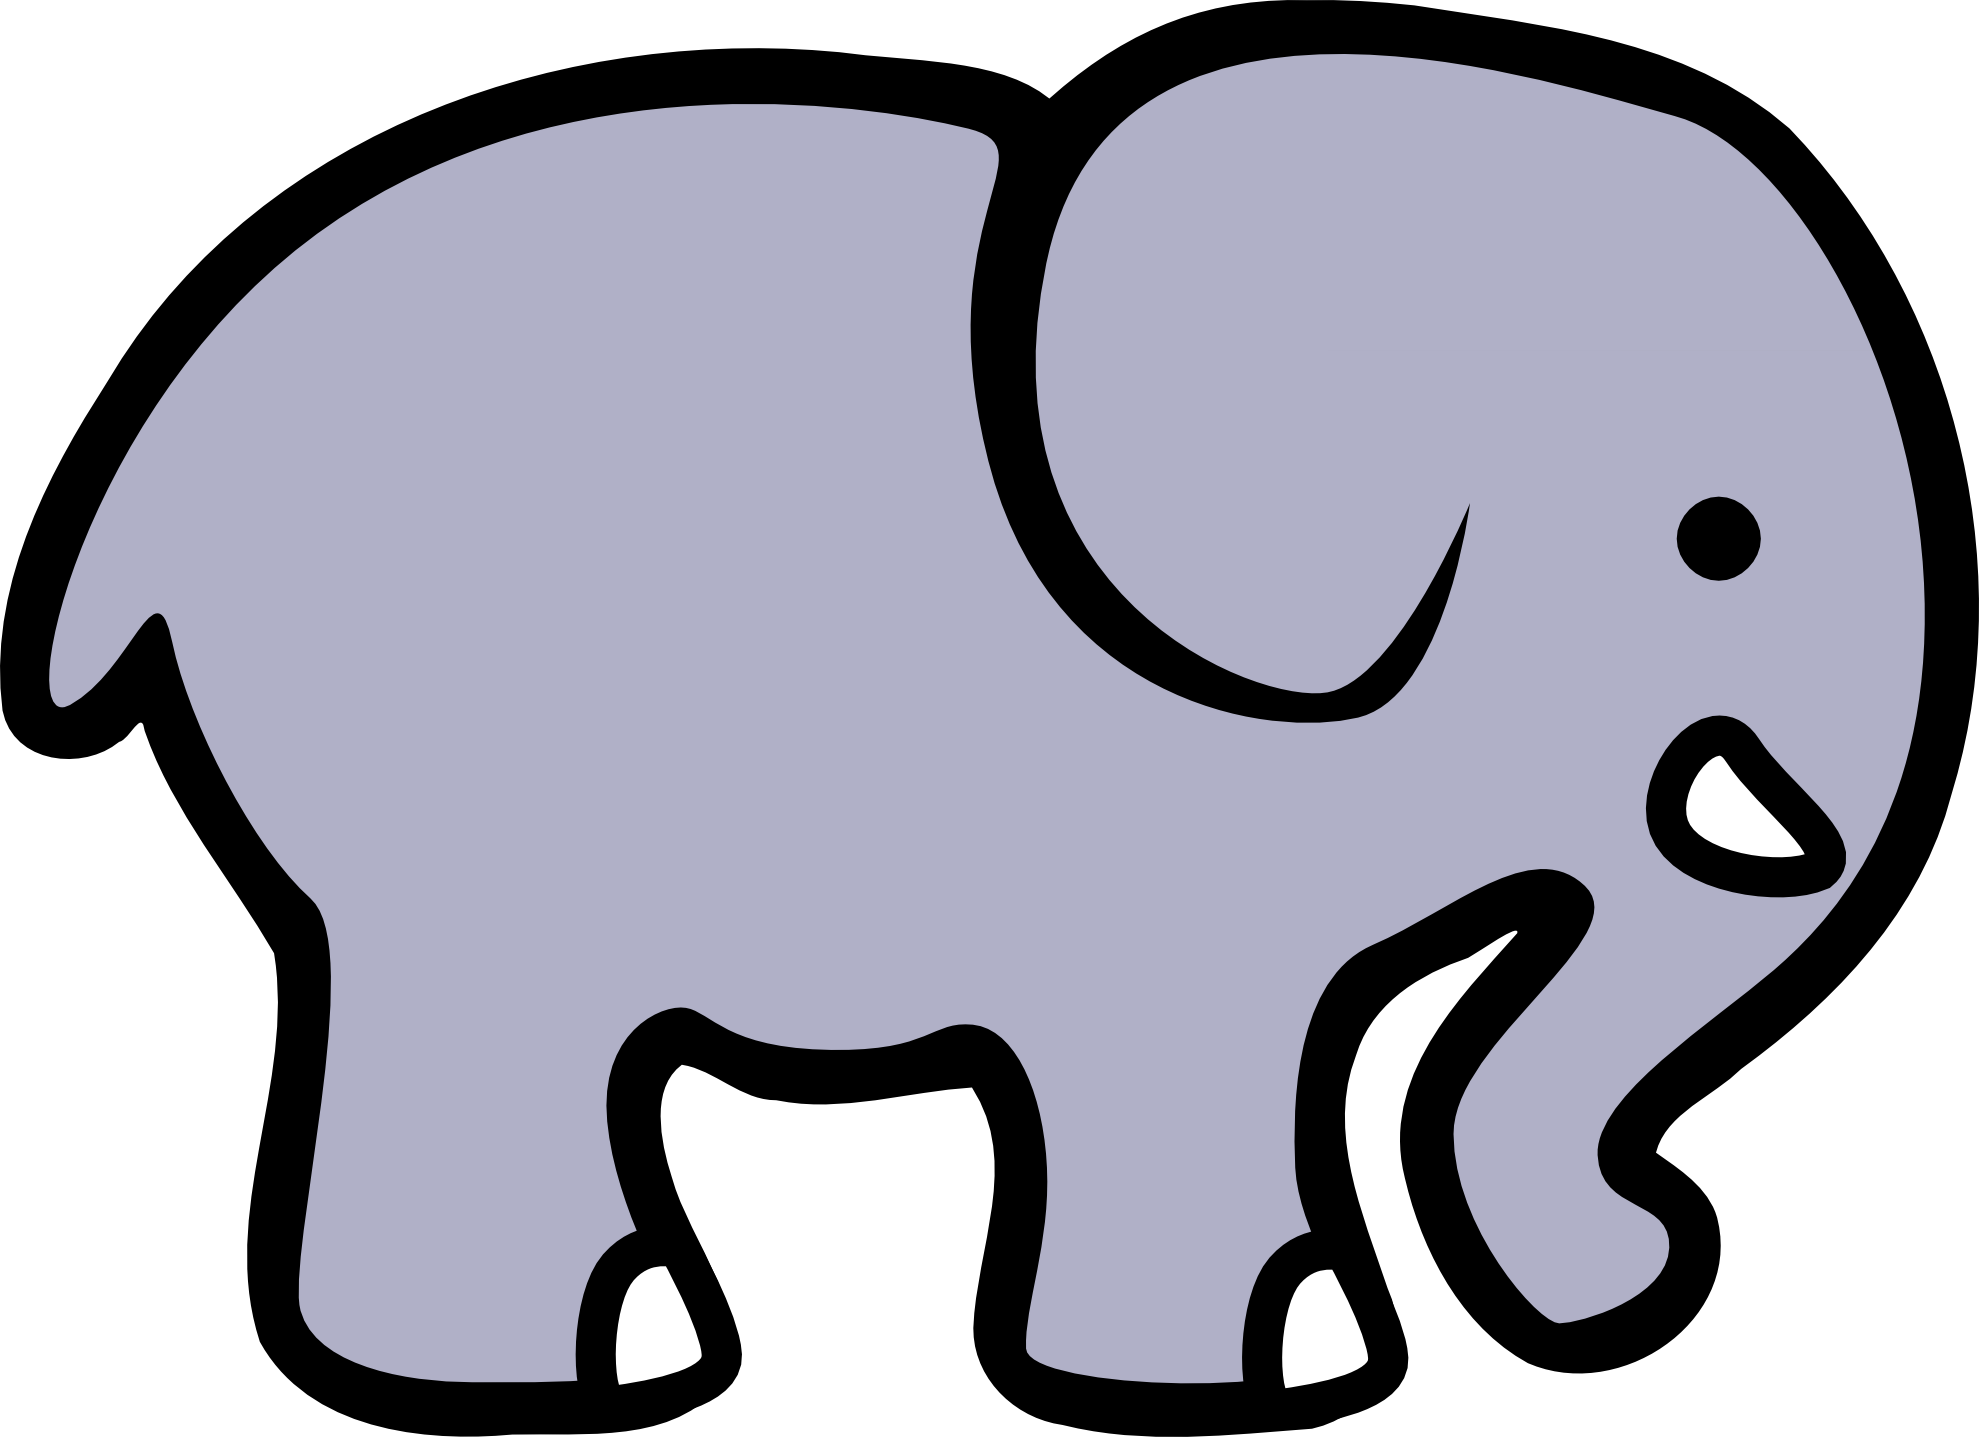 Elephant clip art black and white free clipart 2